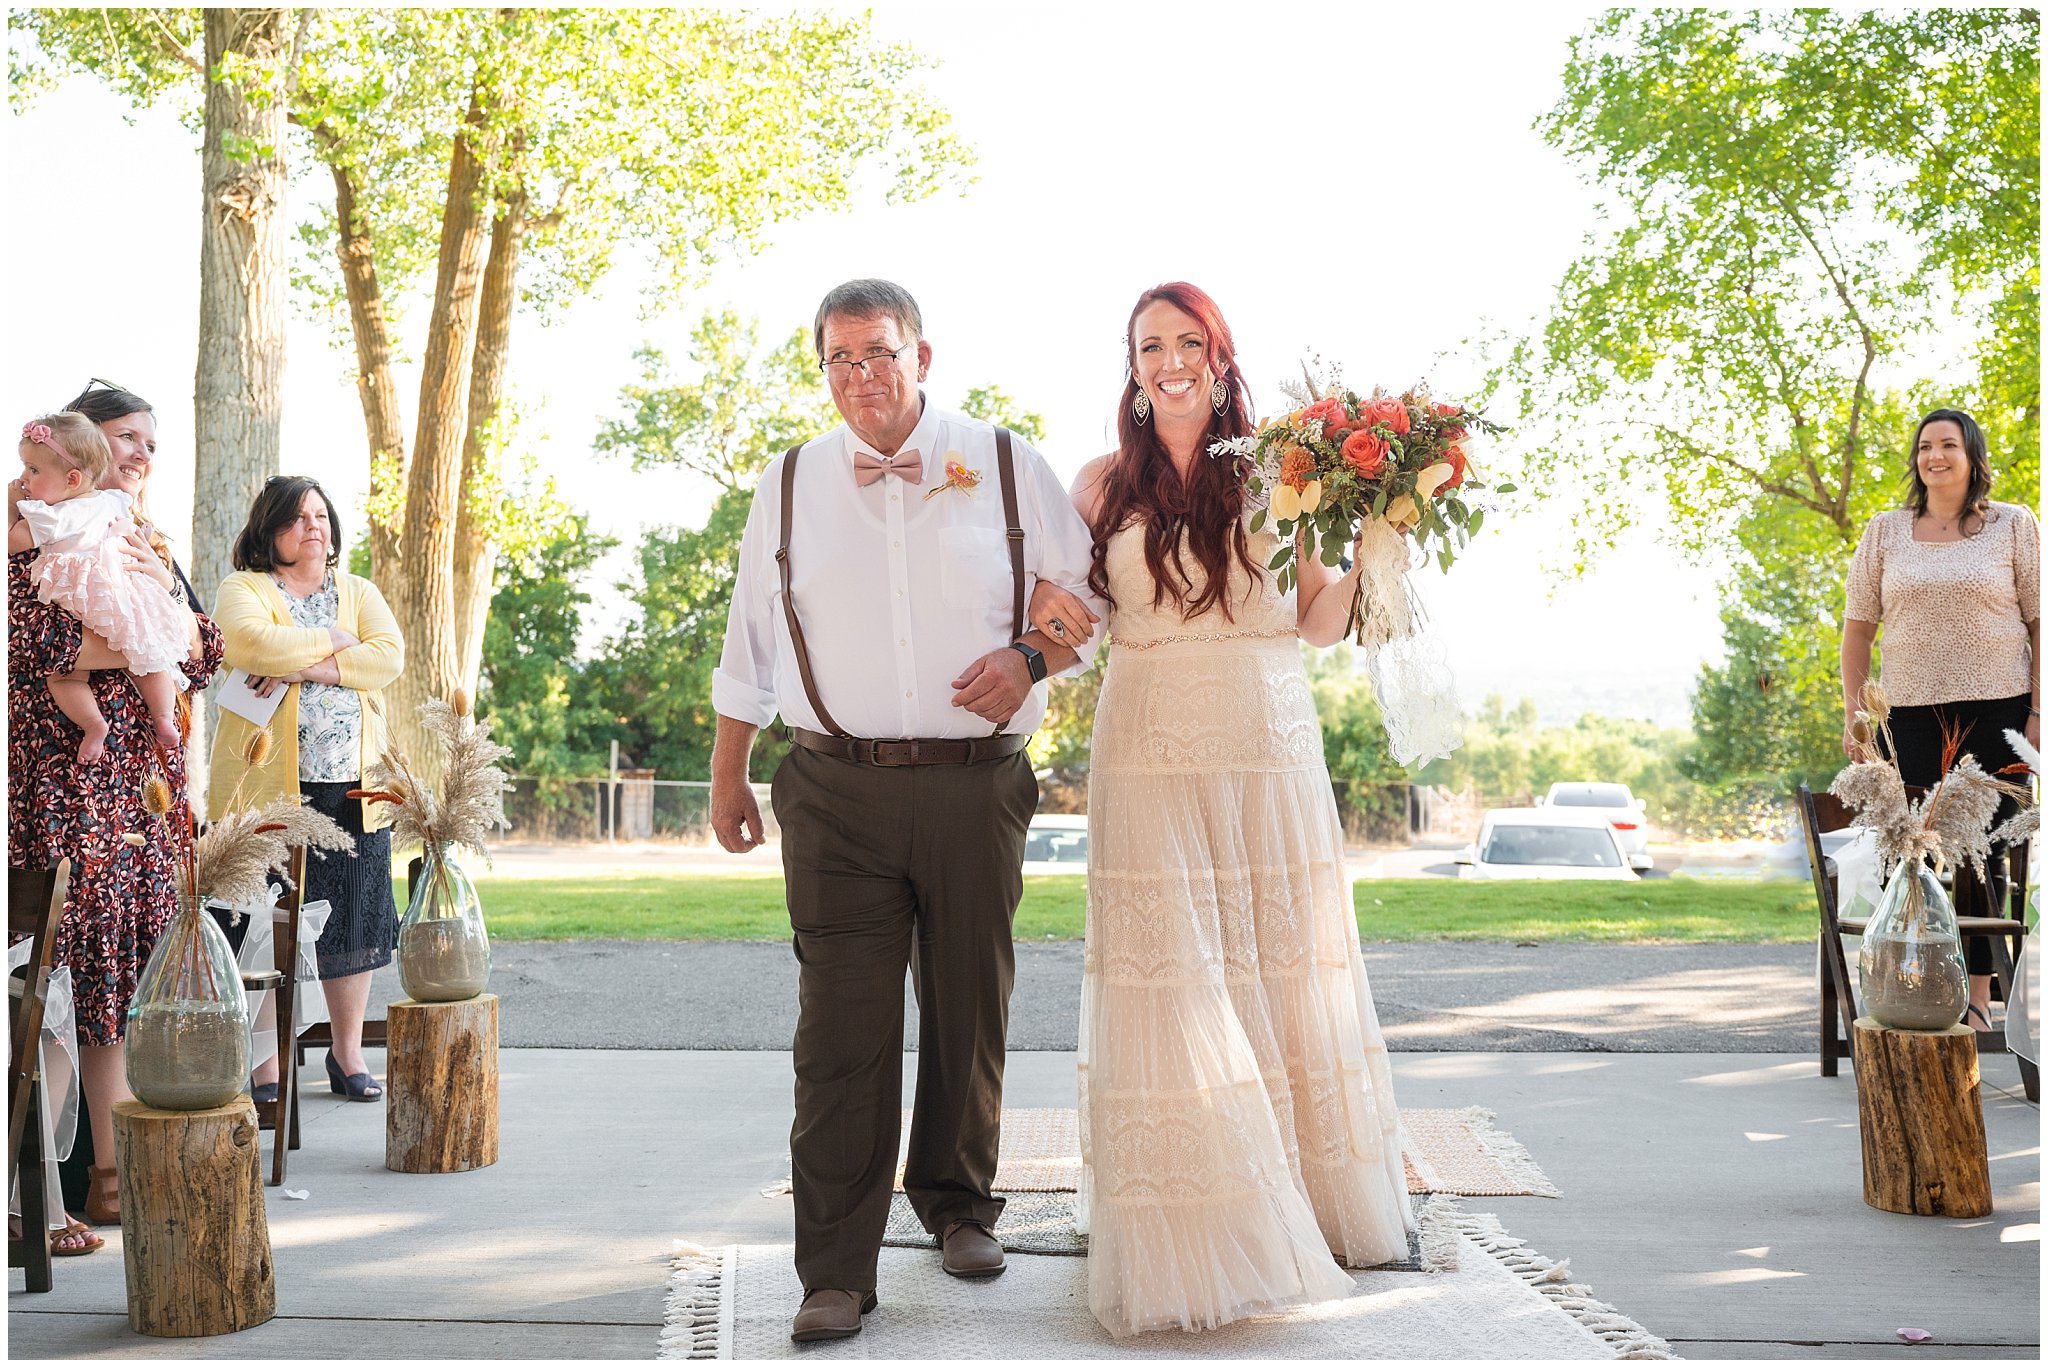 Wedding ceremony with boho decor at Lions Park in Cache Valley | Logan Utah Outdoor Summer Wedding | Jessie and Dallin Photography